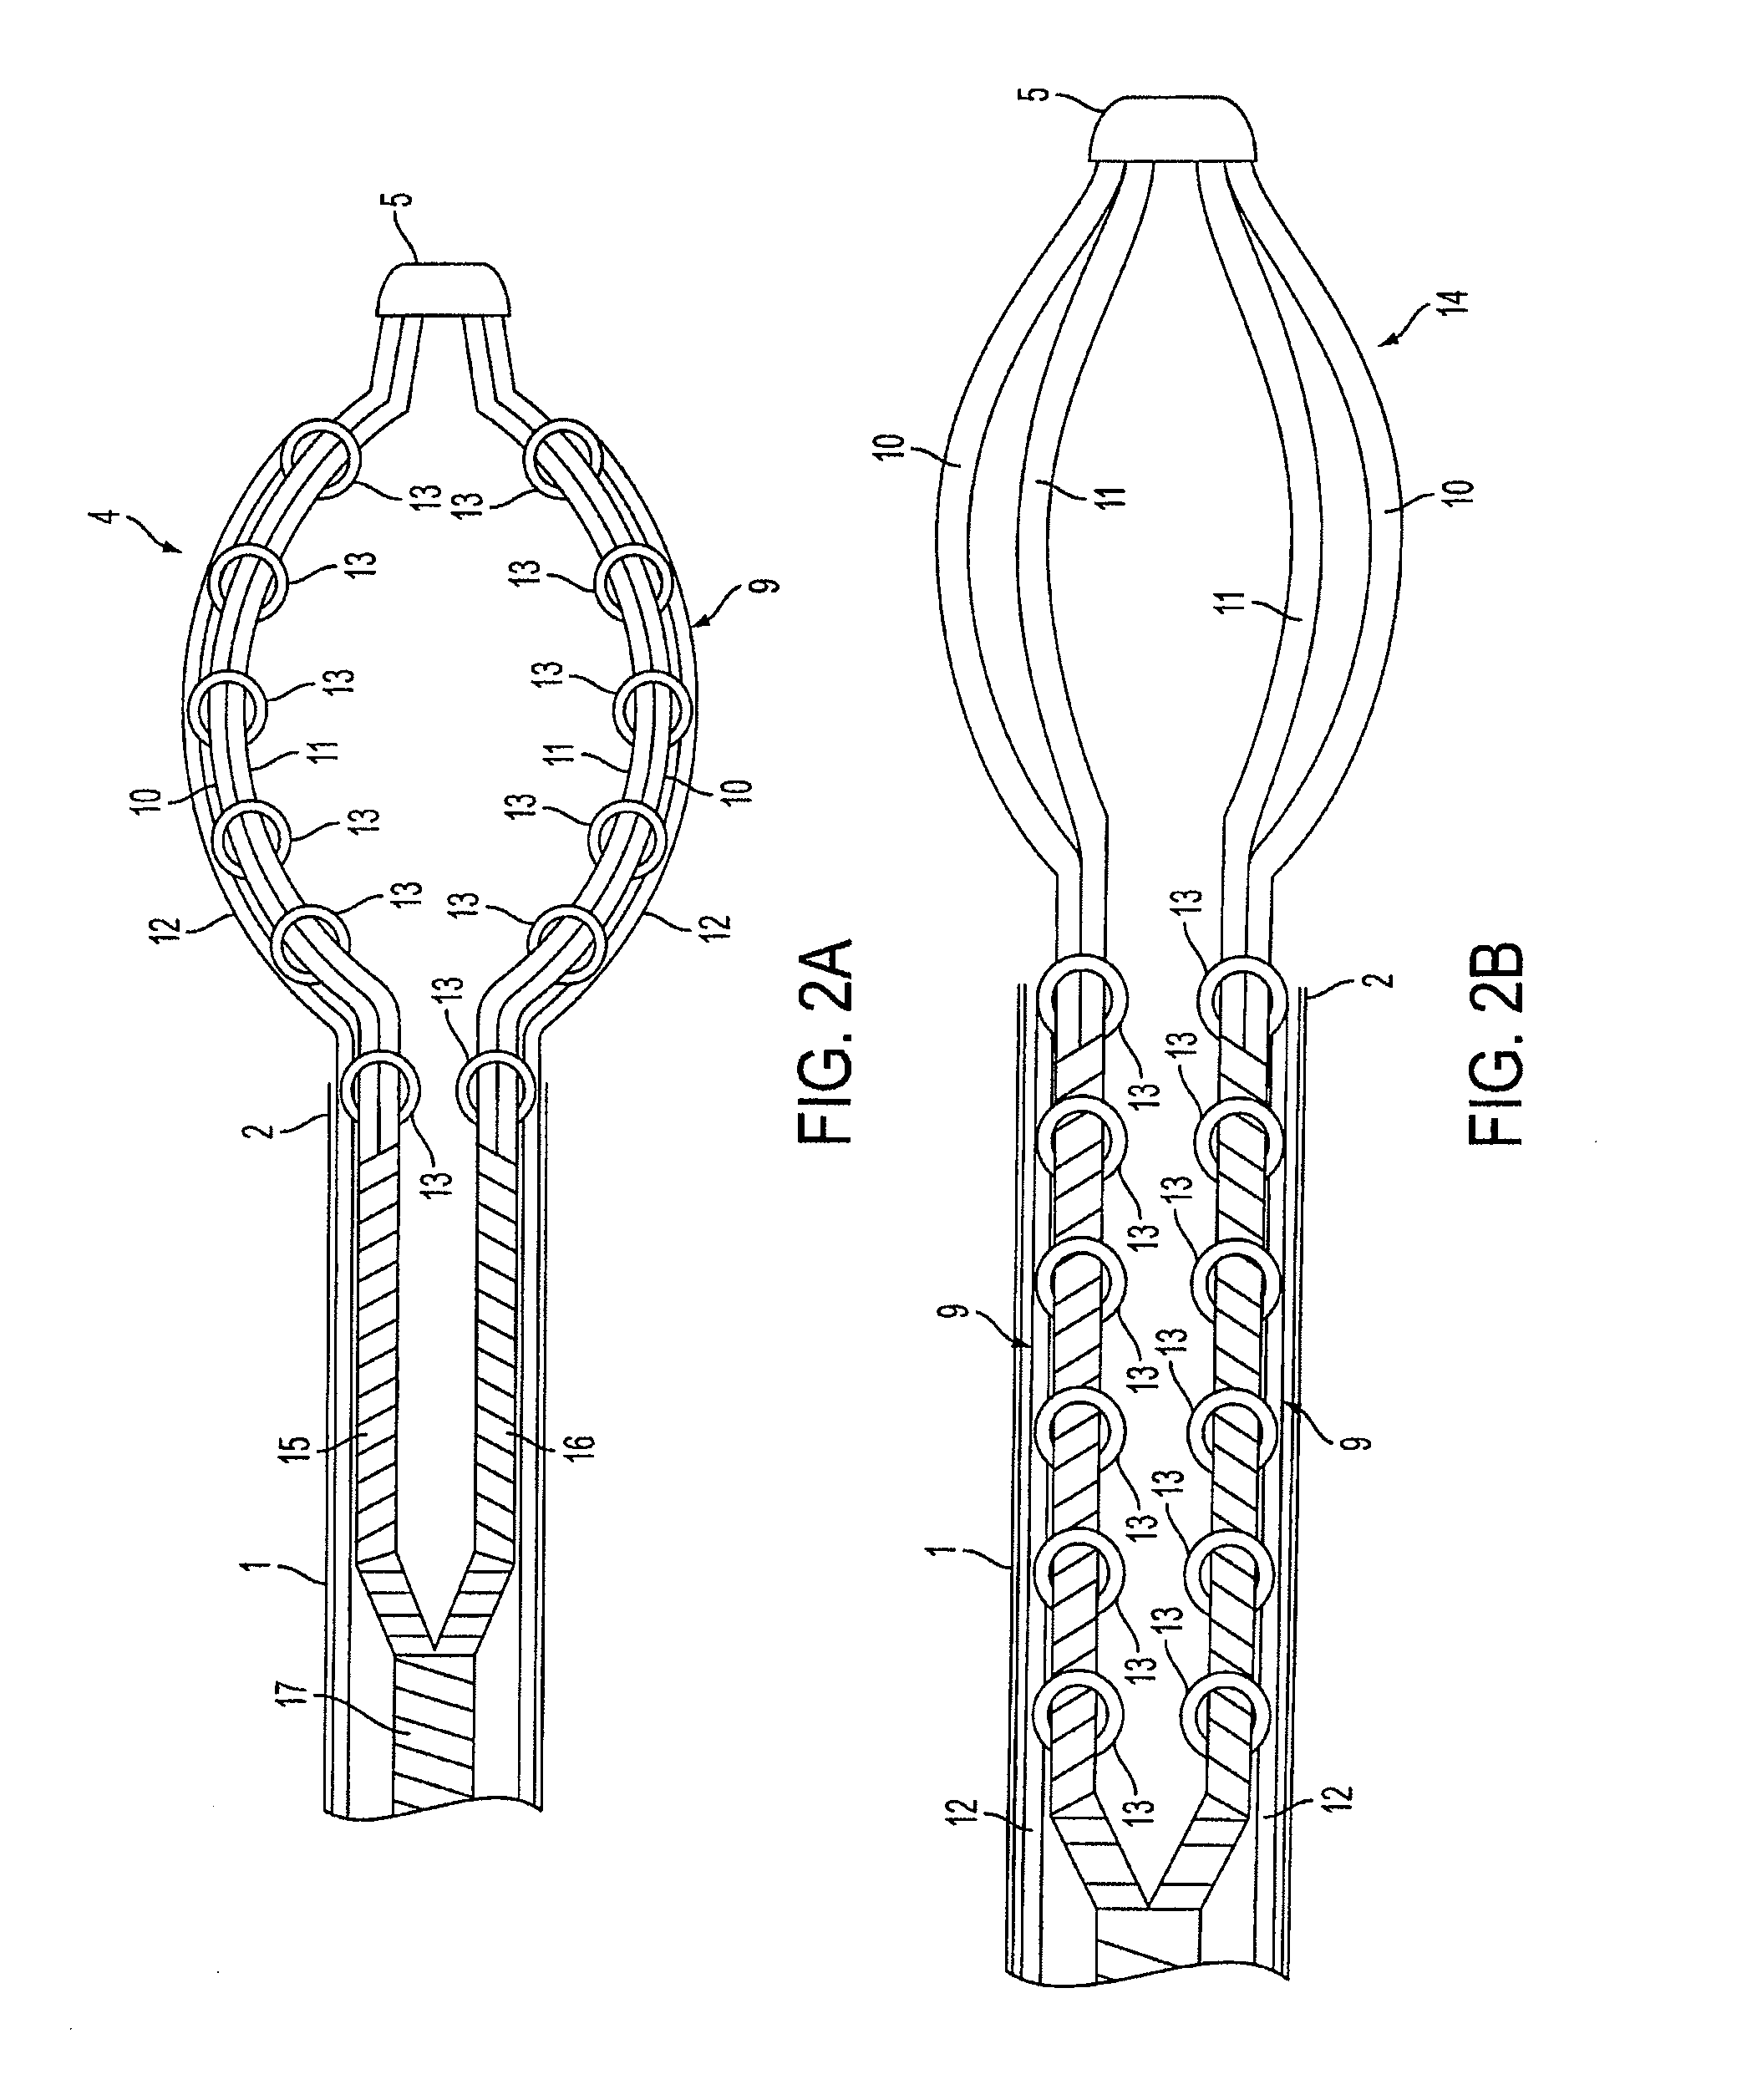 Two-stage snare-basket medical device